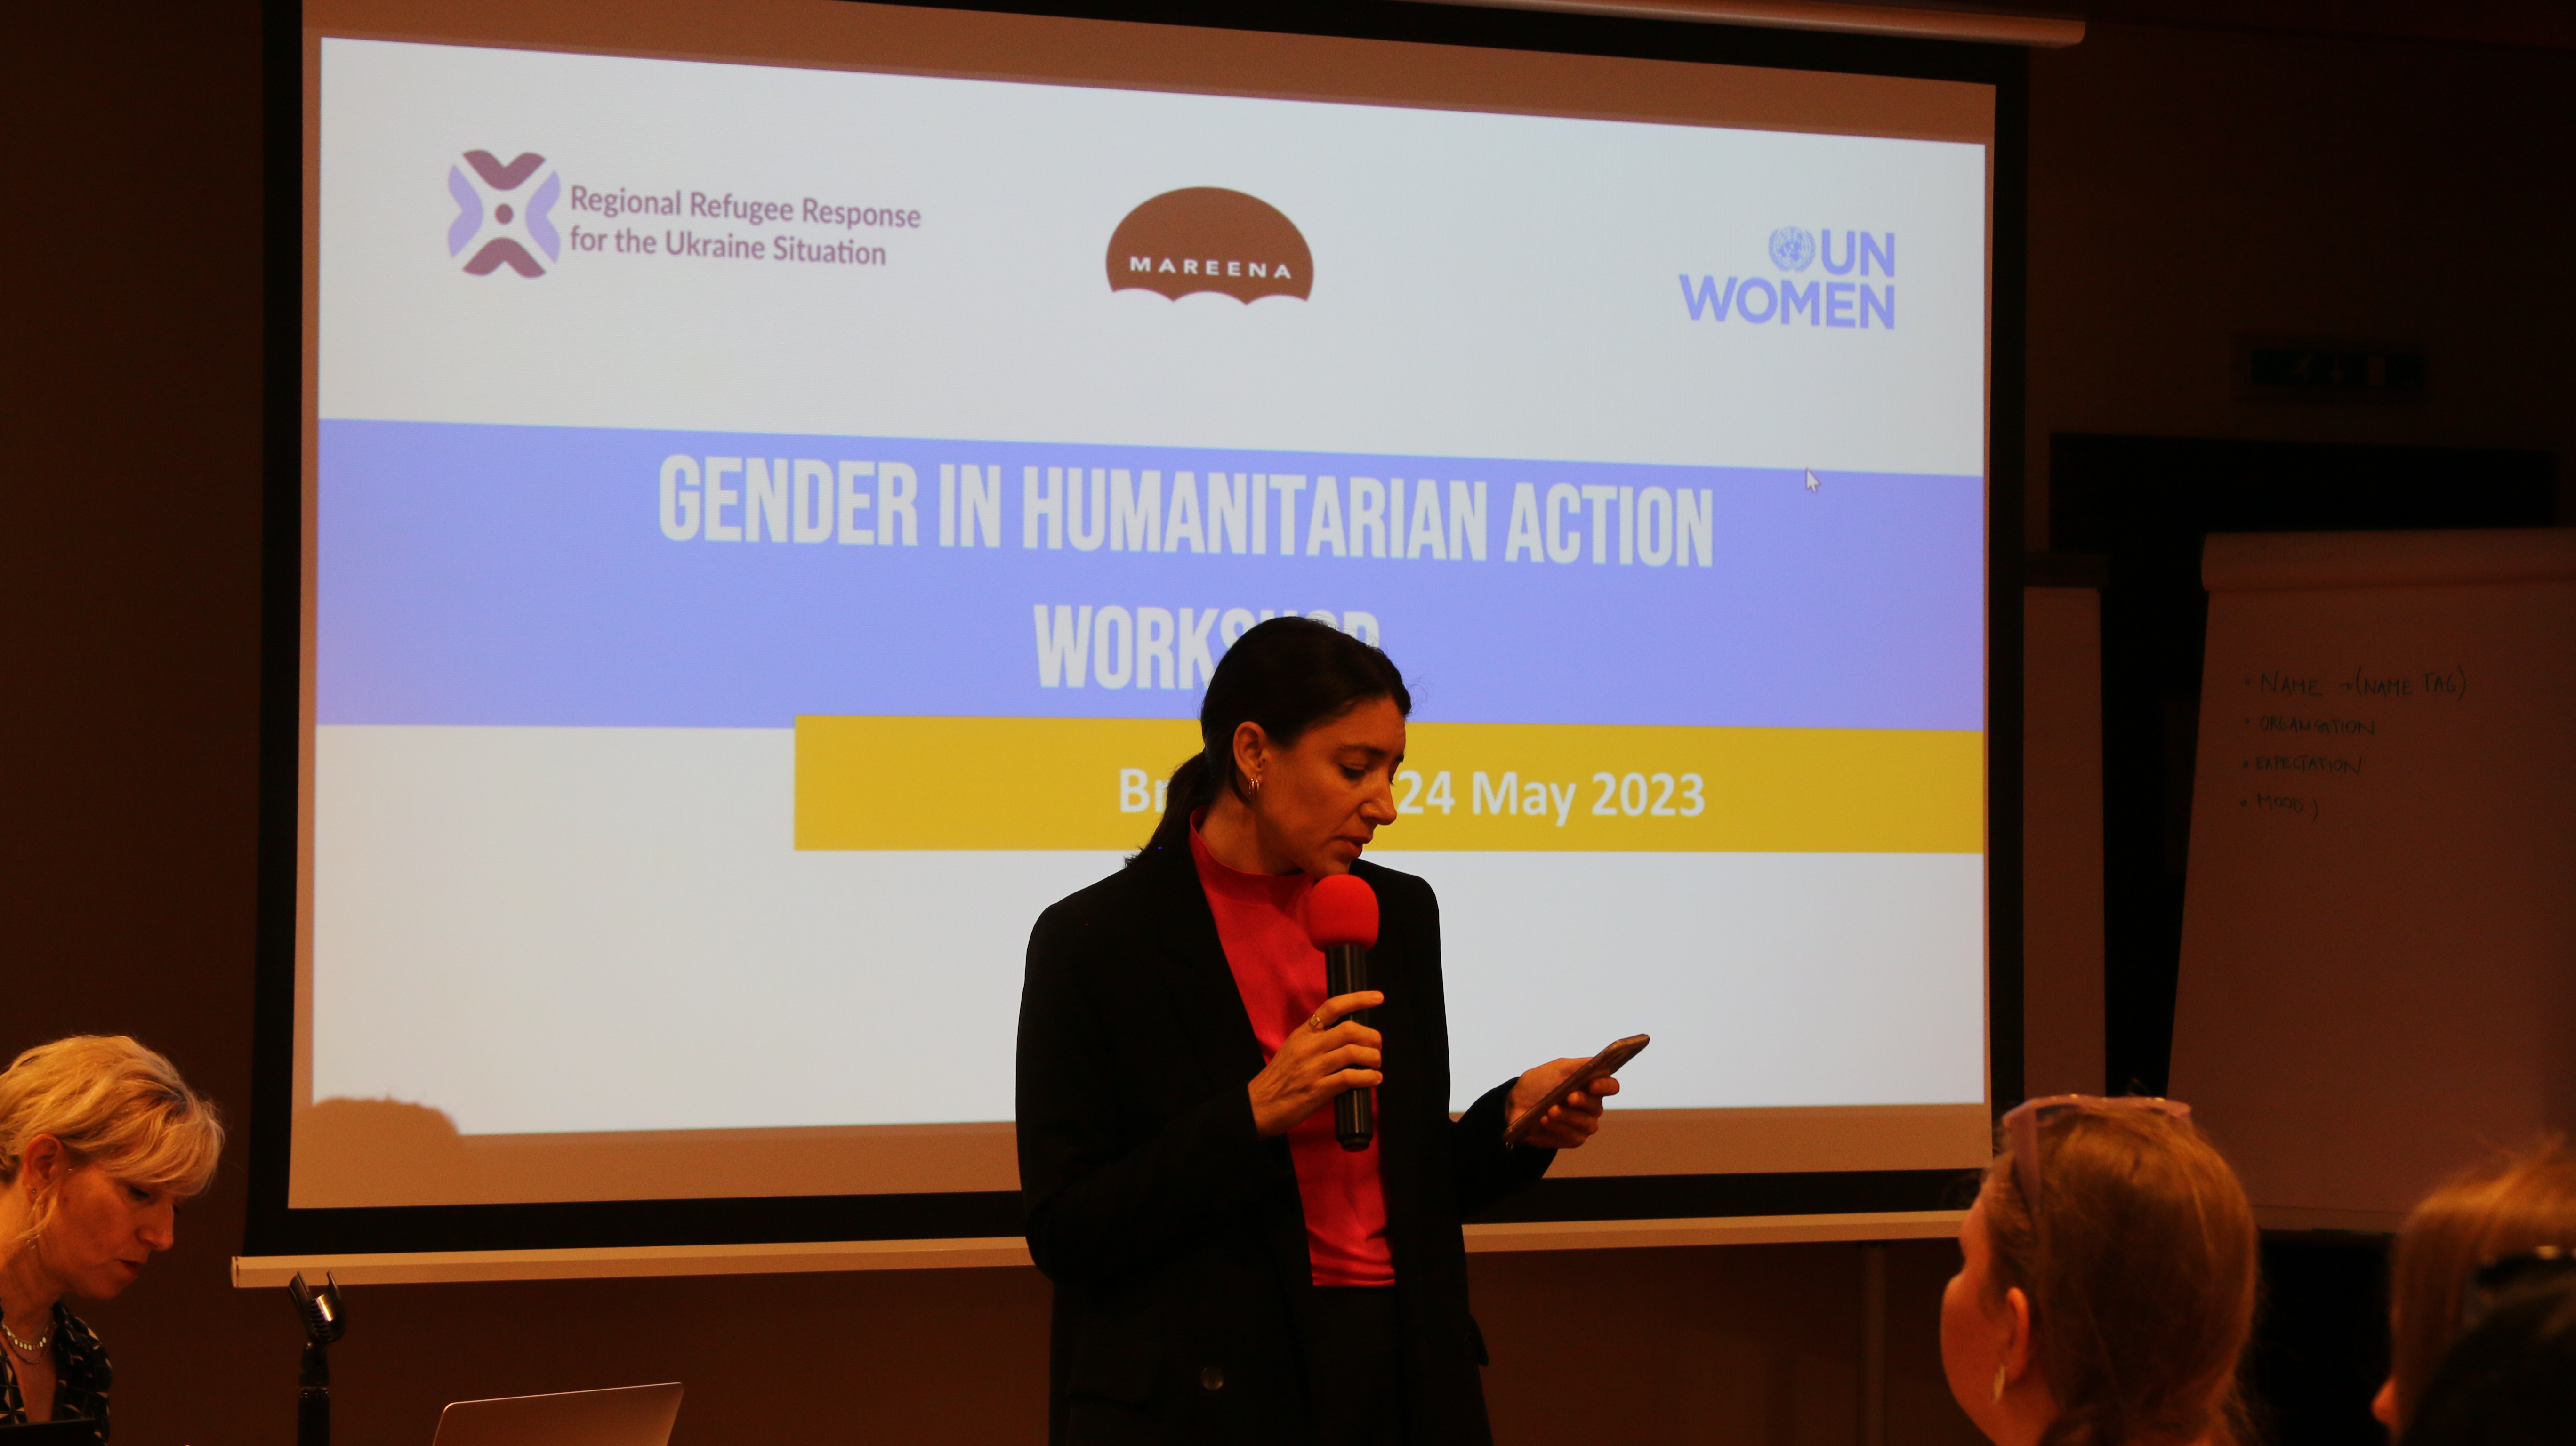 Rebeca Acin, Gender and Humanitarian Specialist at UN Women Regional Office for Europe and Central Asia made the opening remarks at the gender in humanitarian action training in Bratislava, Slovakia. Photo: UN Women / Erman Fermancı